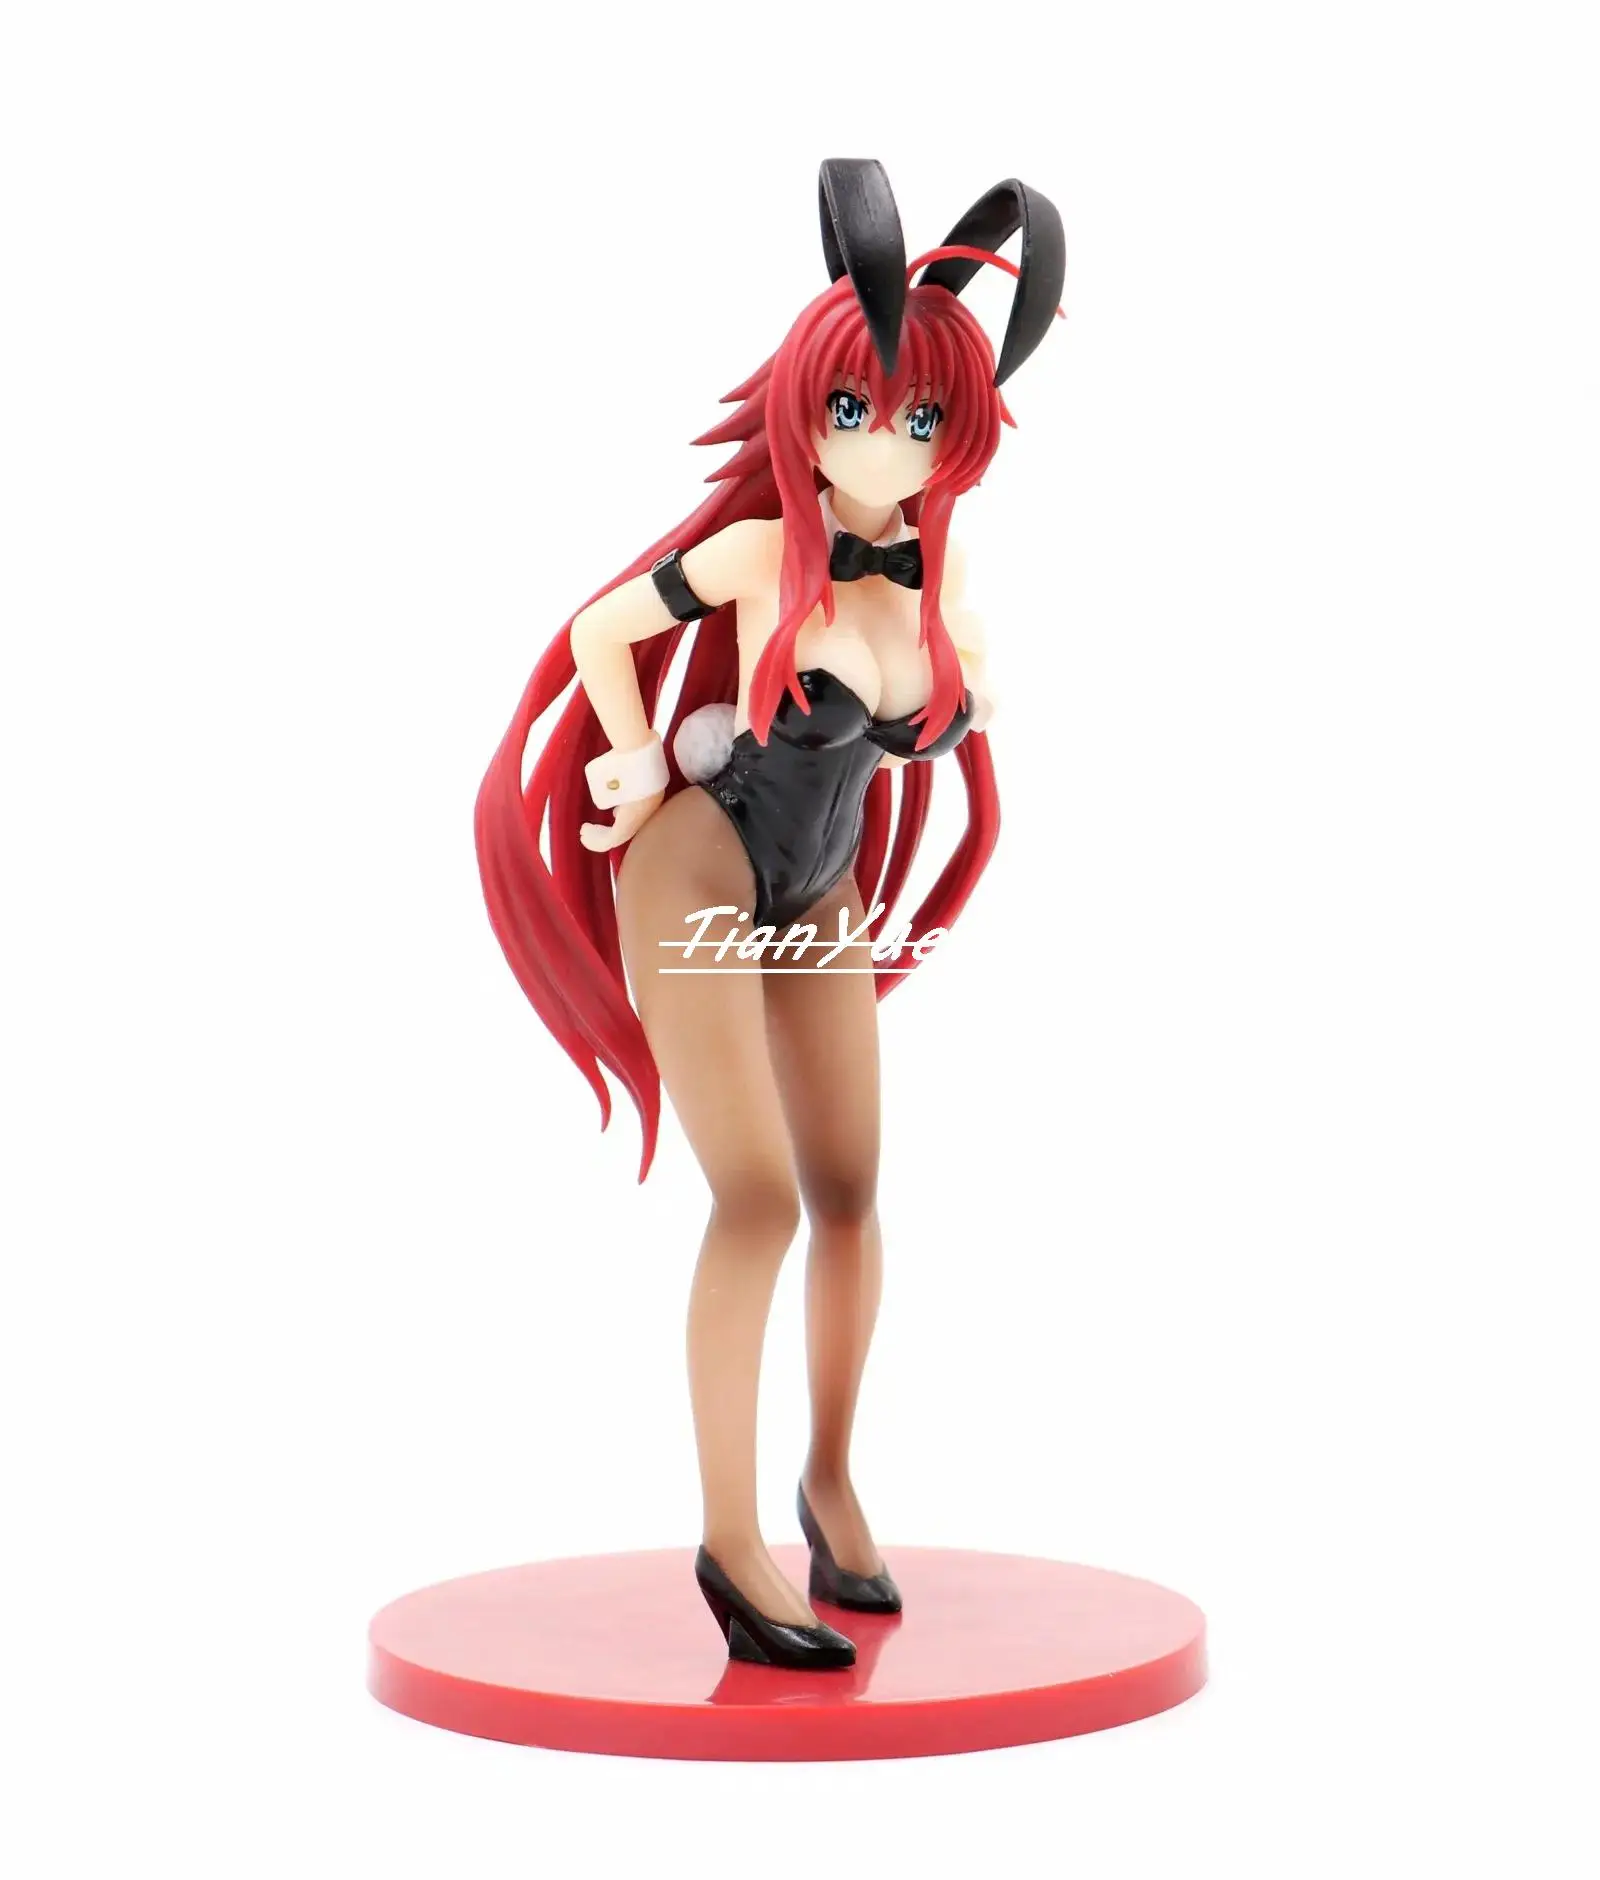 Anime High School DXD Rias Gremory Bunny Ear Ver. Sexy Girls PVC Action Figure Model Toy